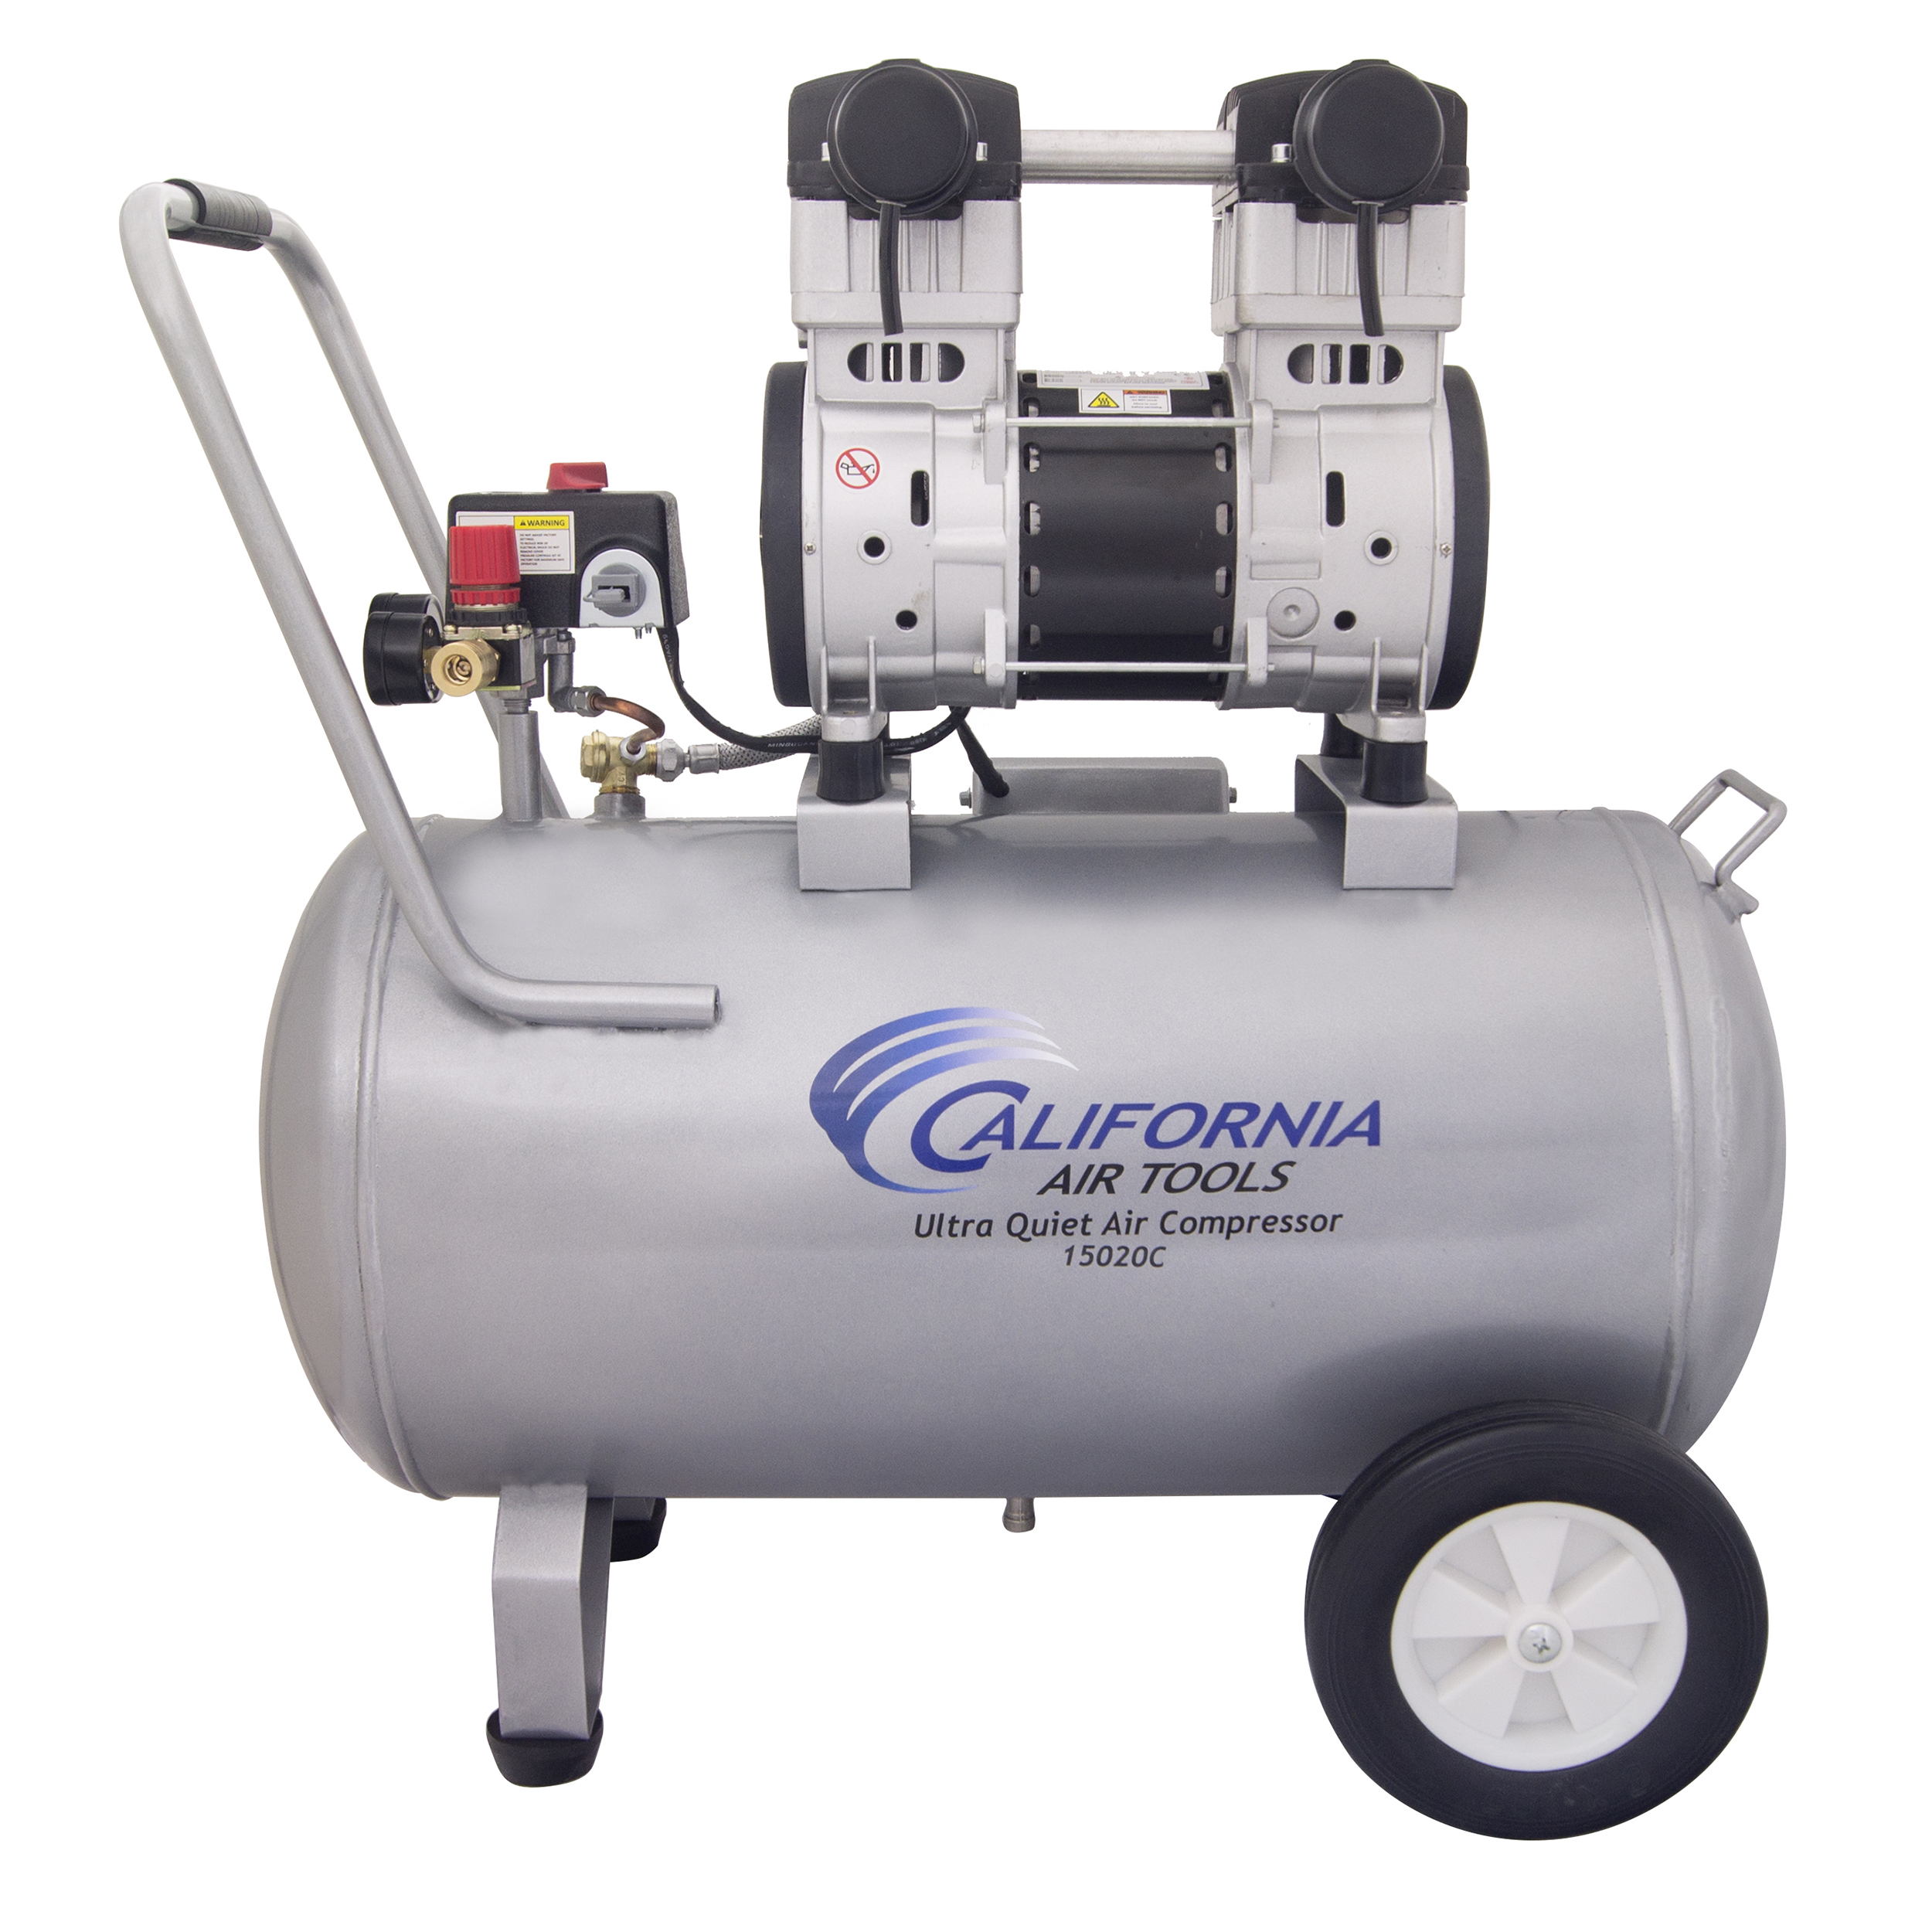 15020c Ultra Quiet And Oil-free 2.0 Hp, 15 Gal. Steel Tank Air Compressor